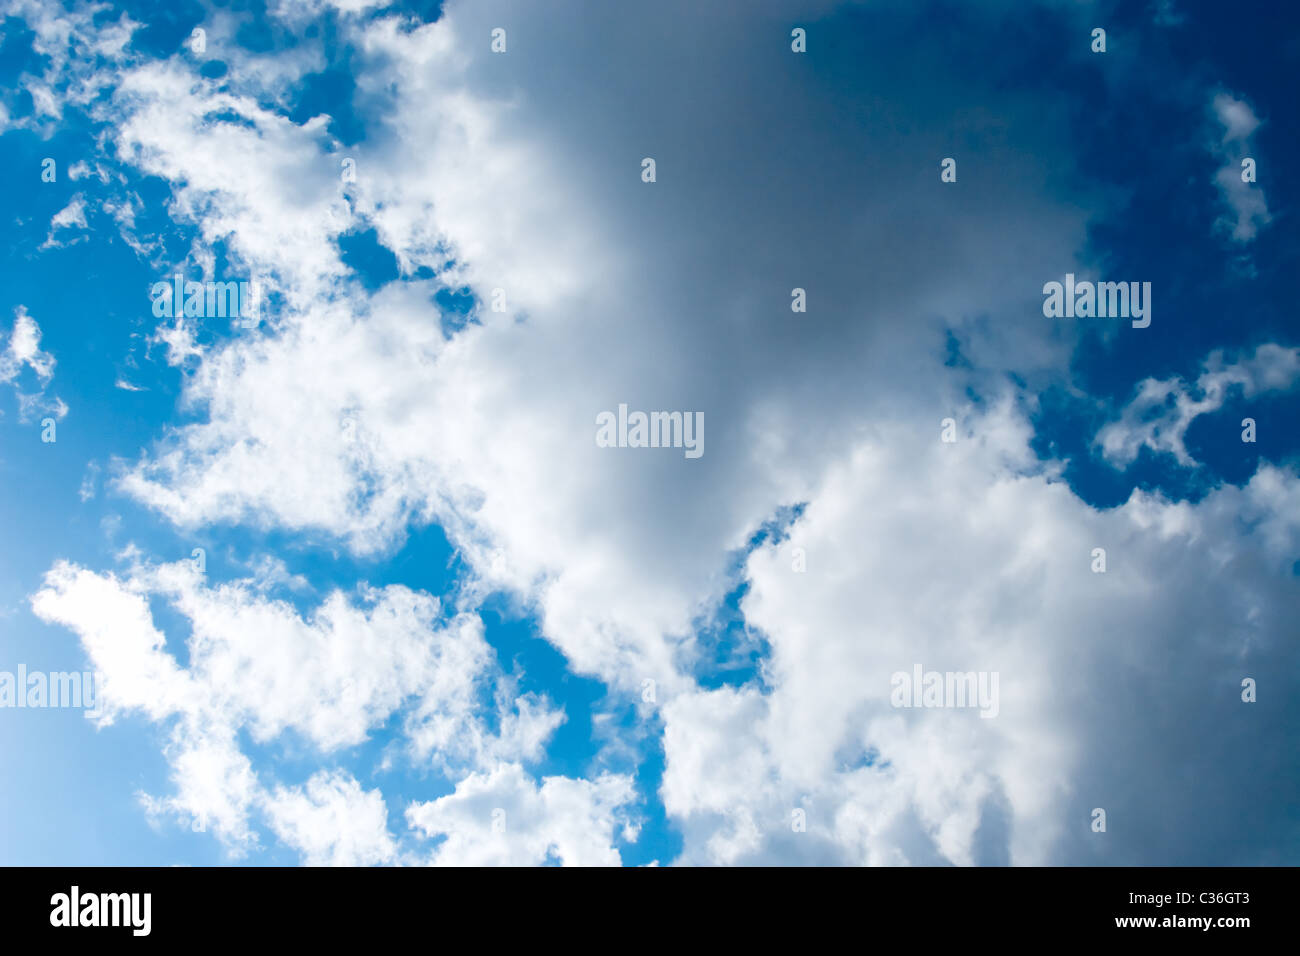 Blue sky with some white puffy clouds Stock Photo